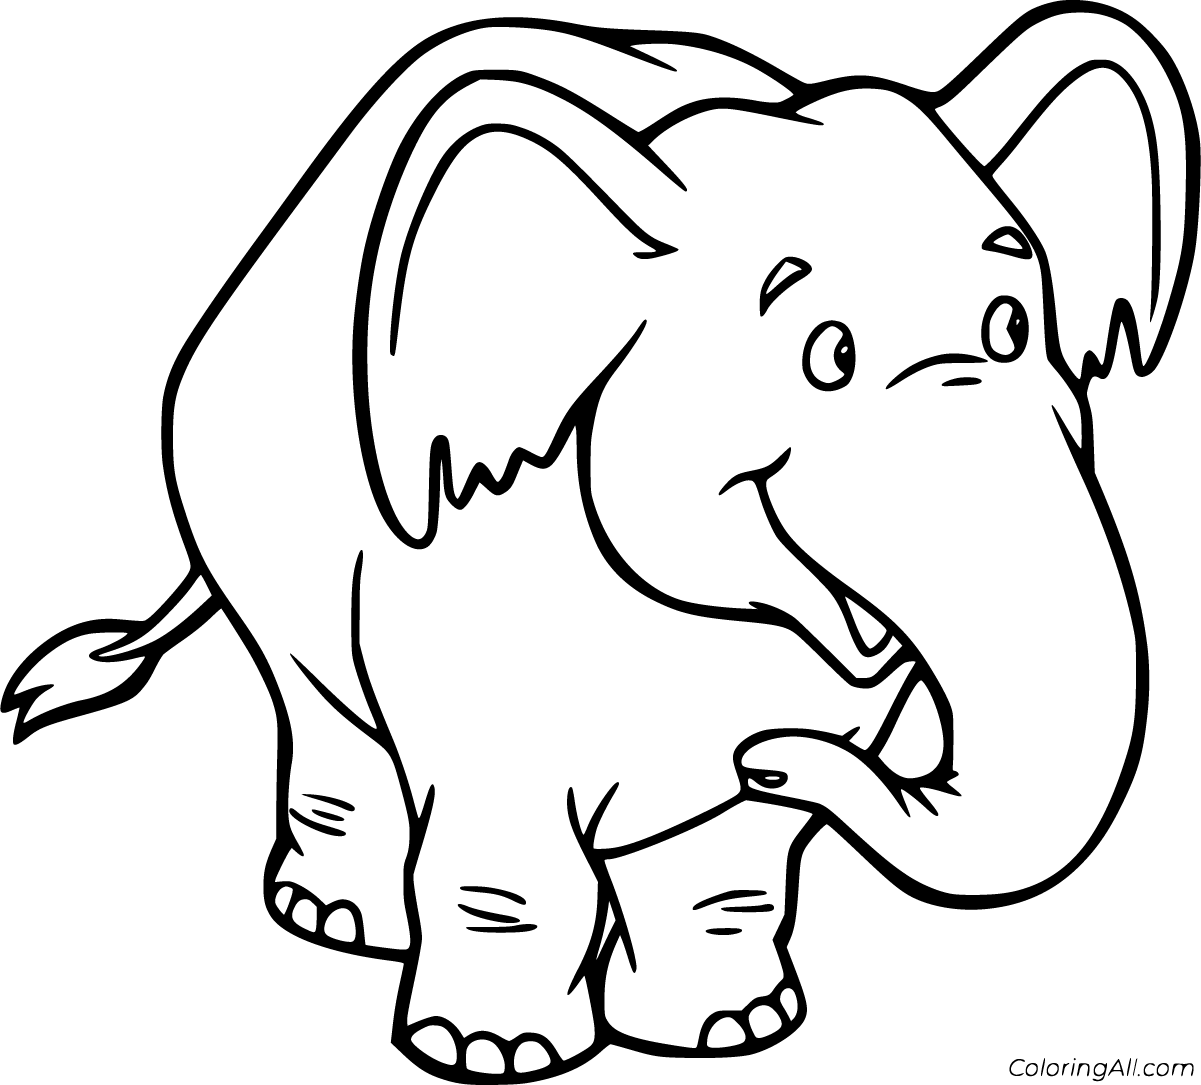 Download Elephant Coloring Pages - ColoringAll